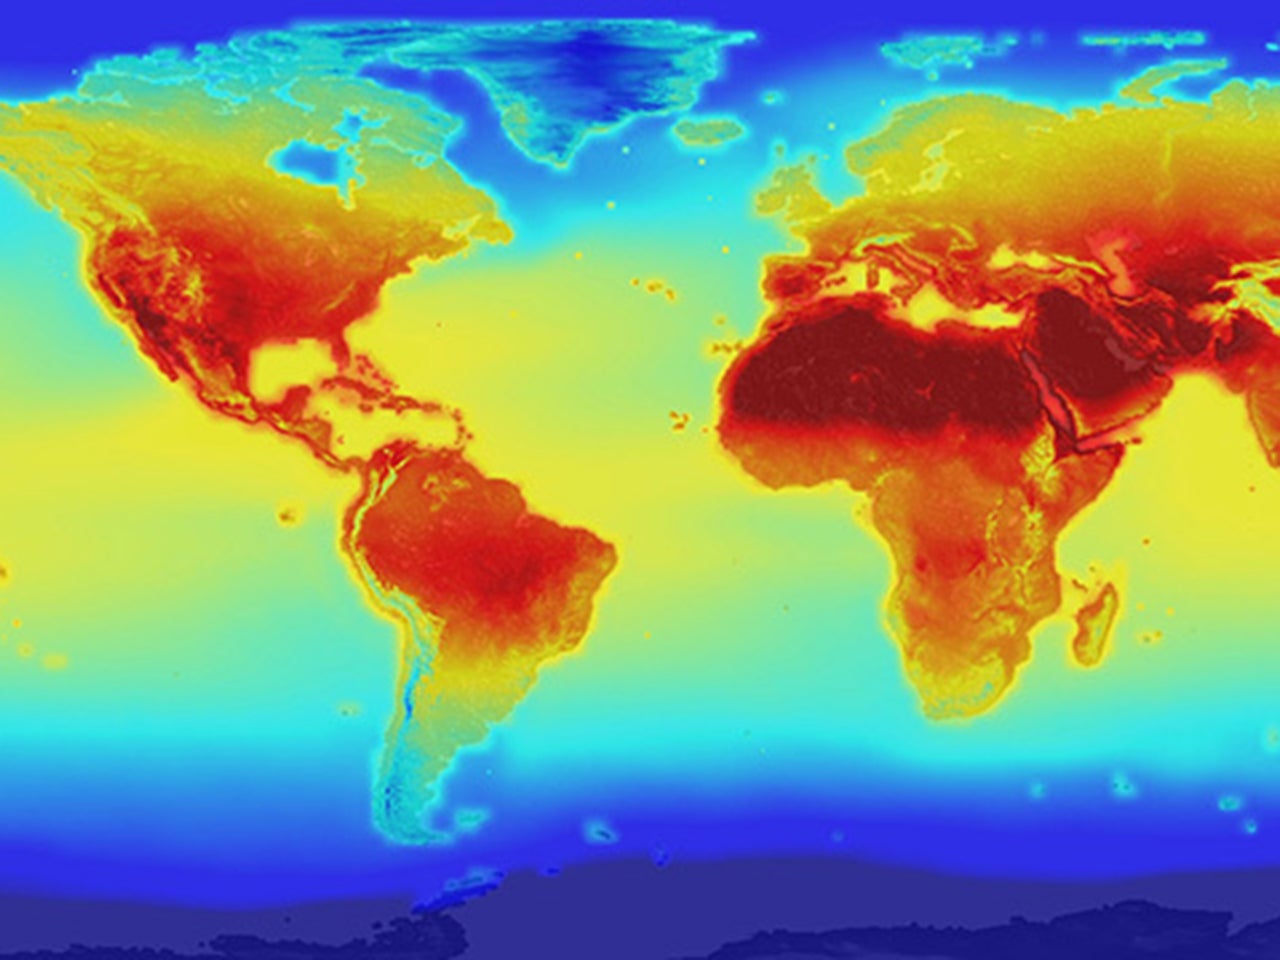 A heat map created by NASA. California is dark red, showing that it will be extremely hot in the next century.